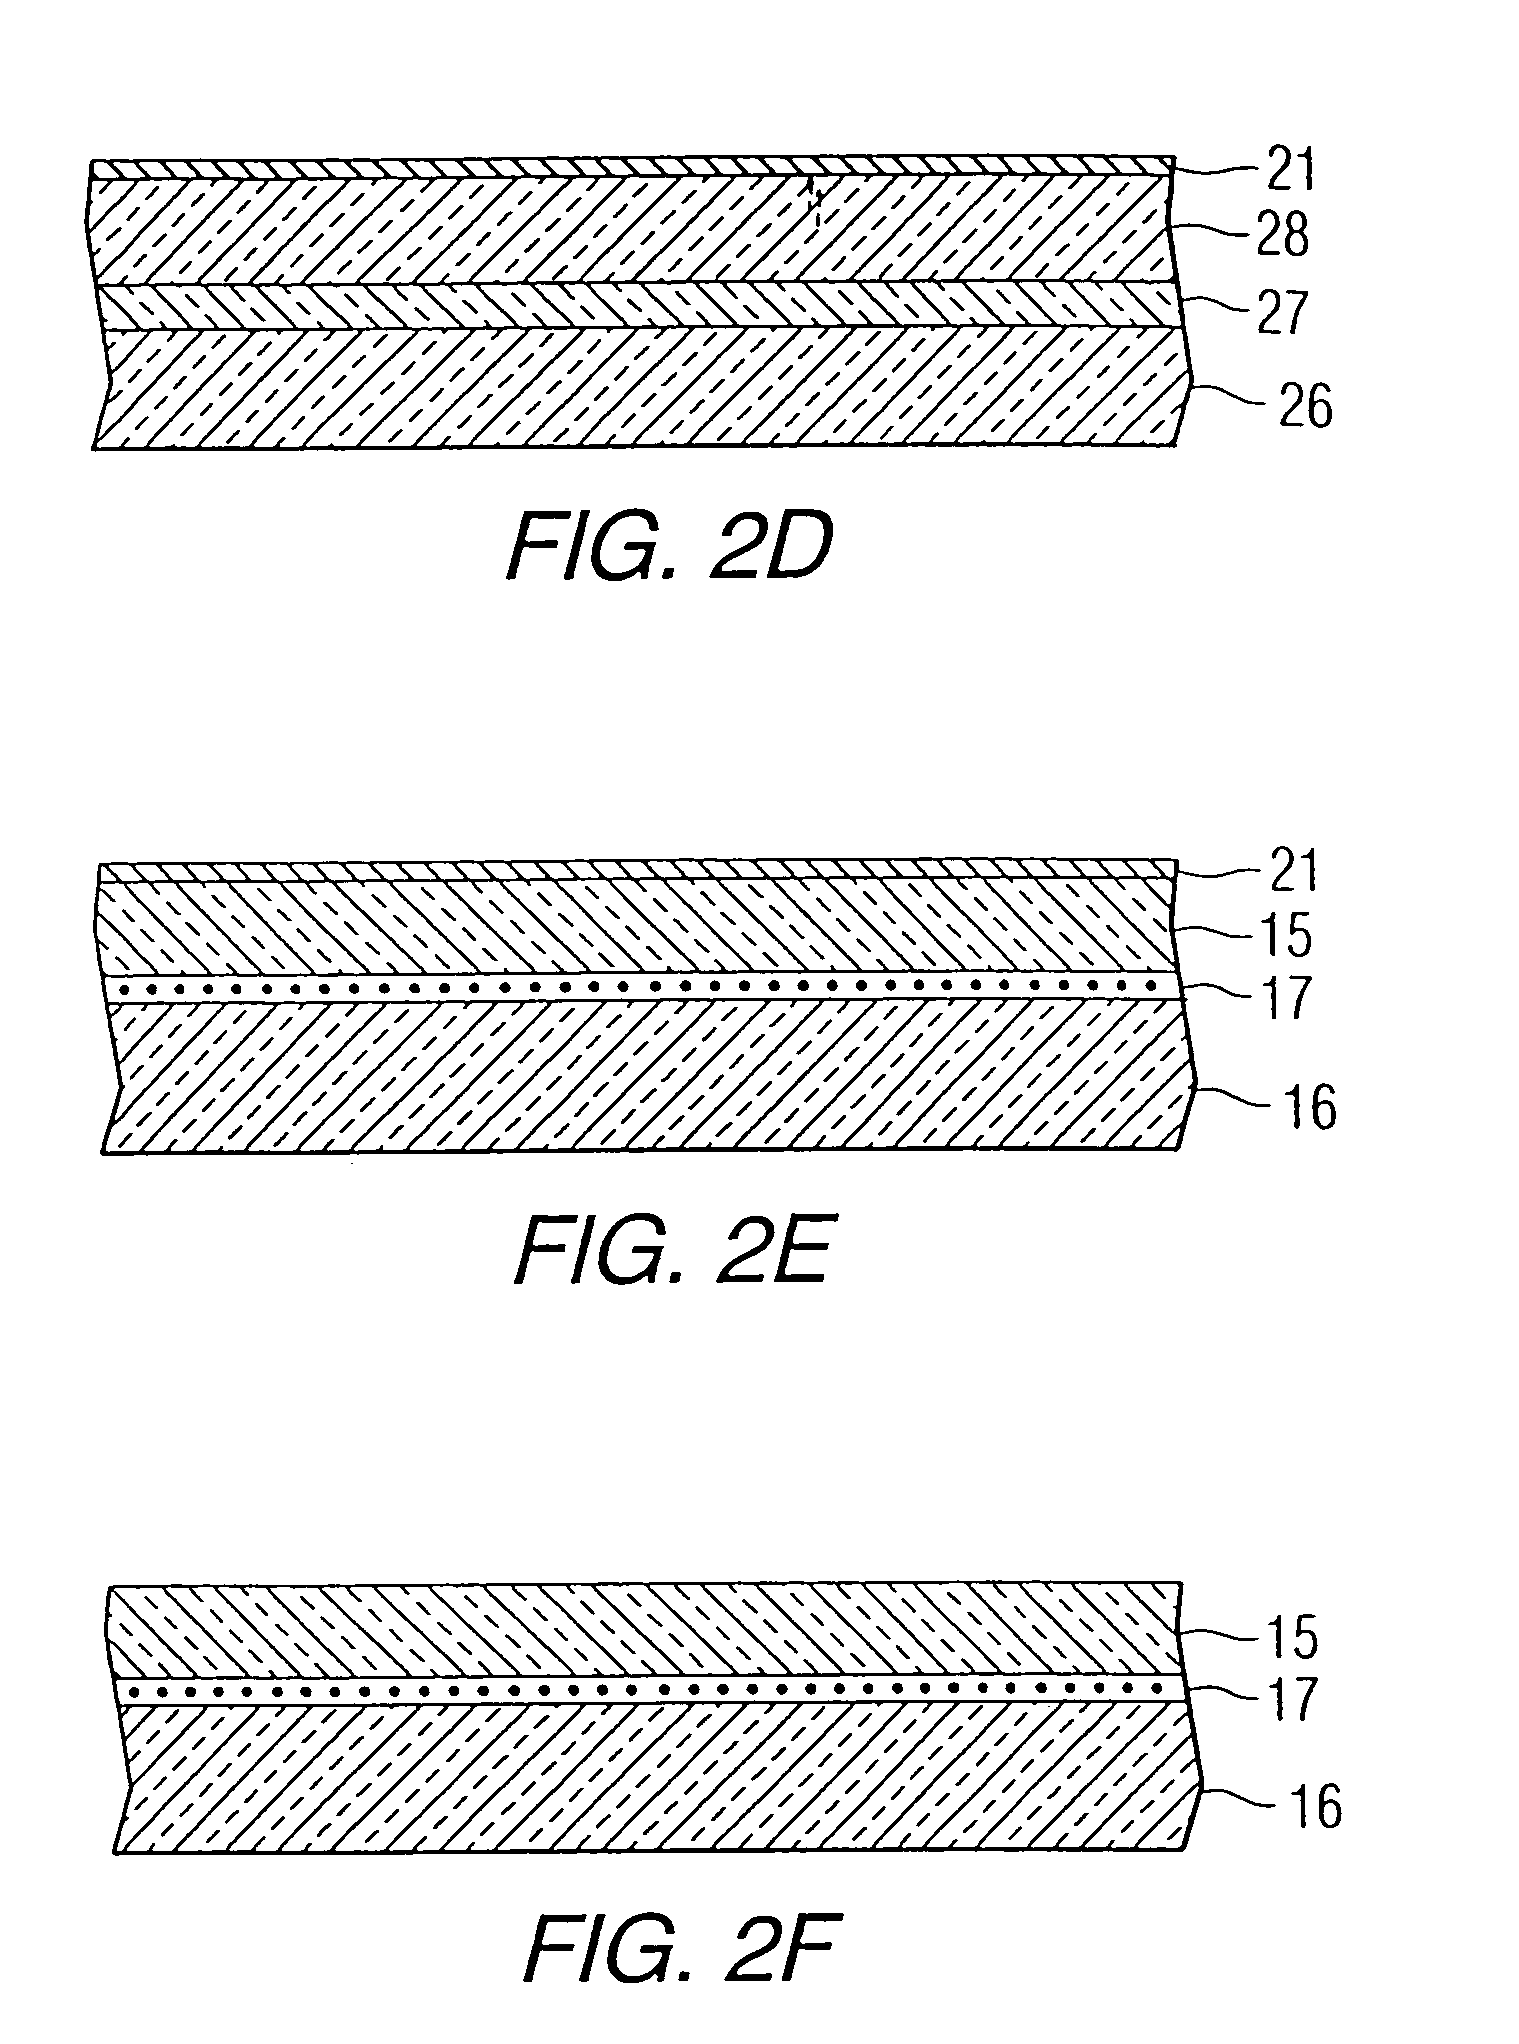 Bonded substrate for an integrated circuit containing a planar intrinsic gettering zone